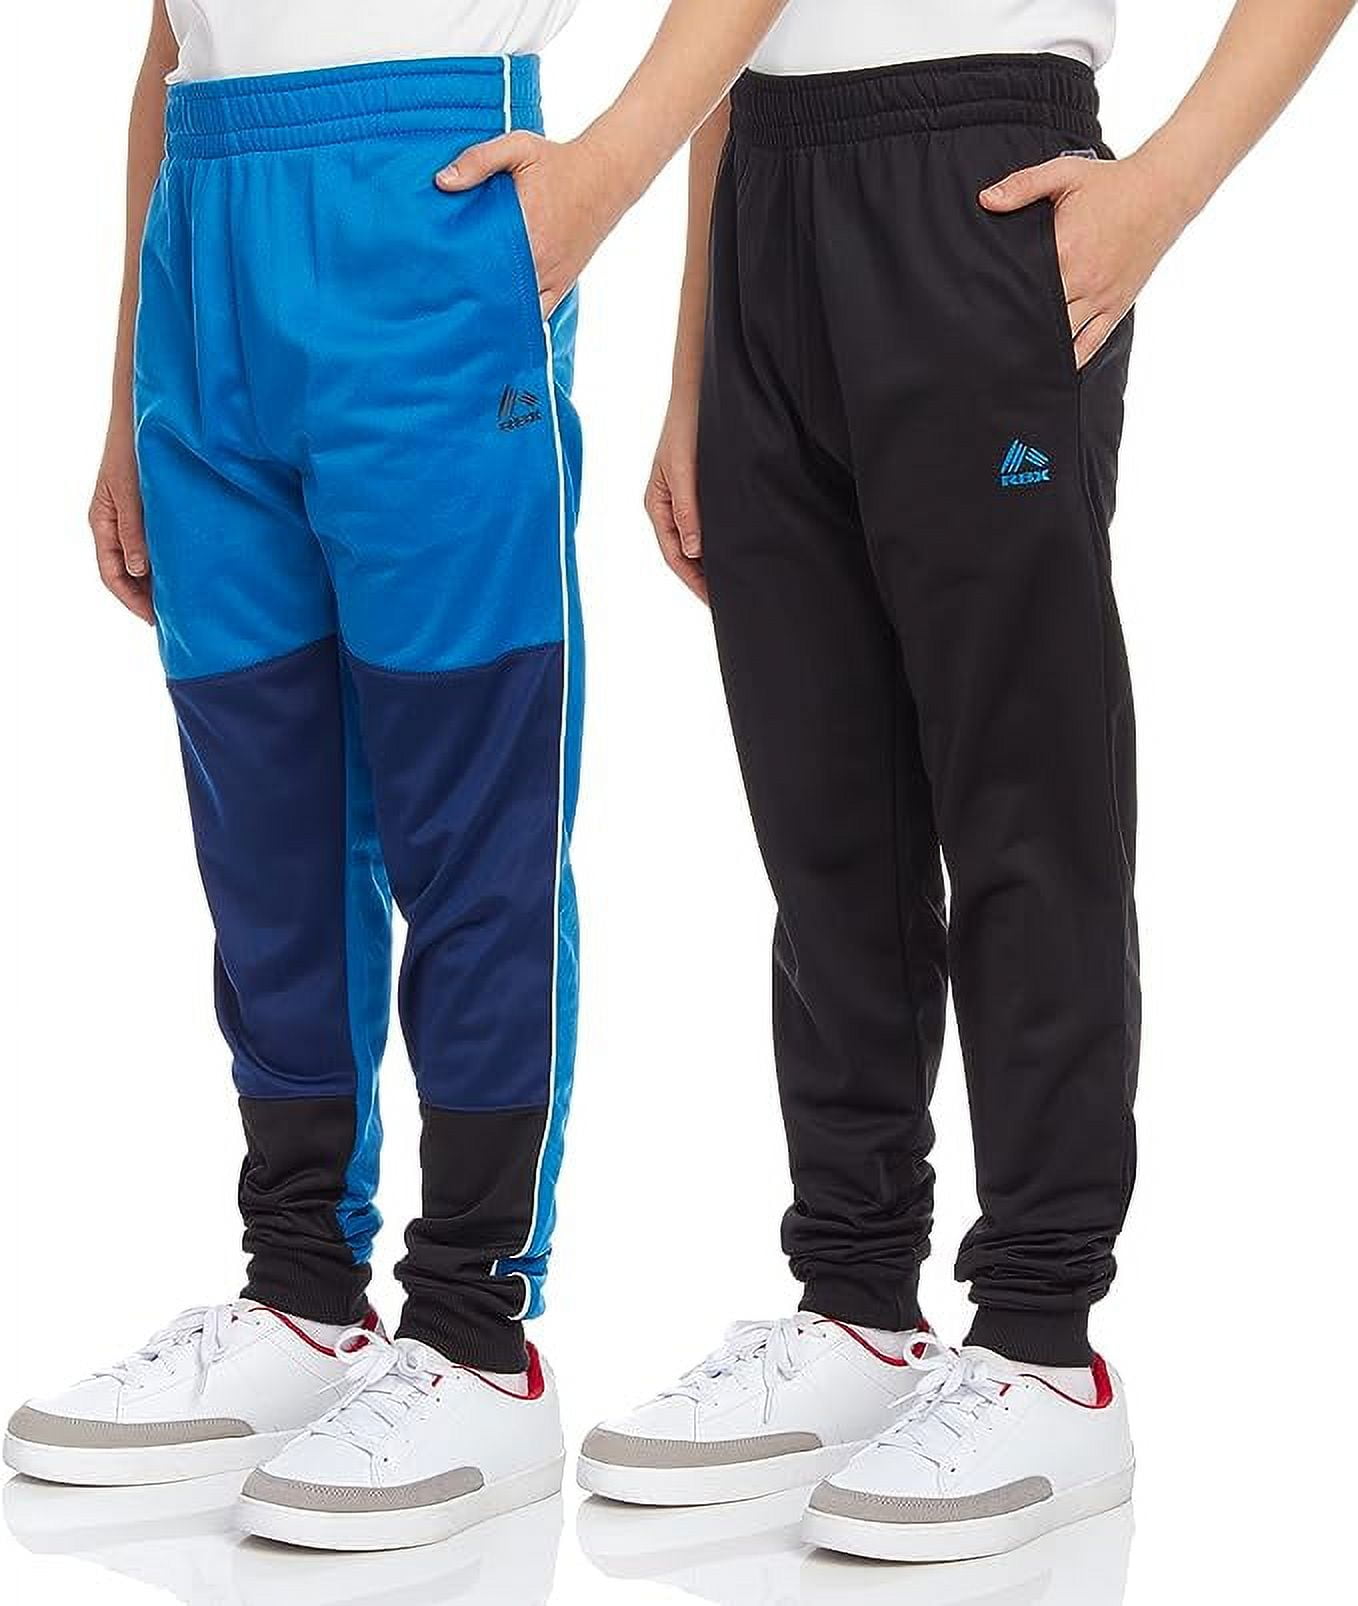 Under armour track pants, Men's Fashion, Bottoms, Trousers on Carousell